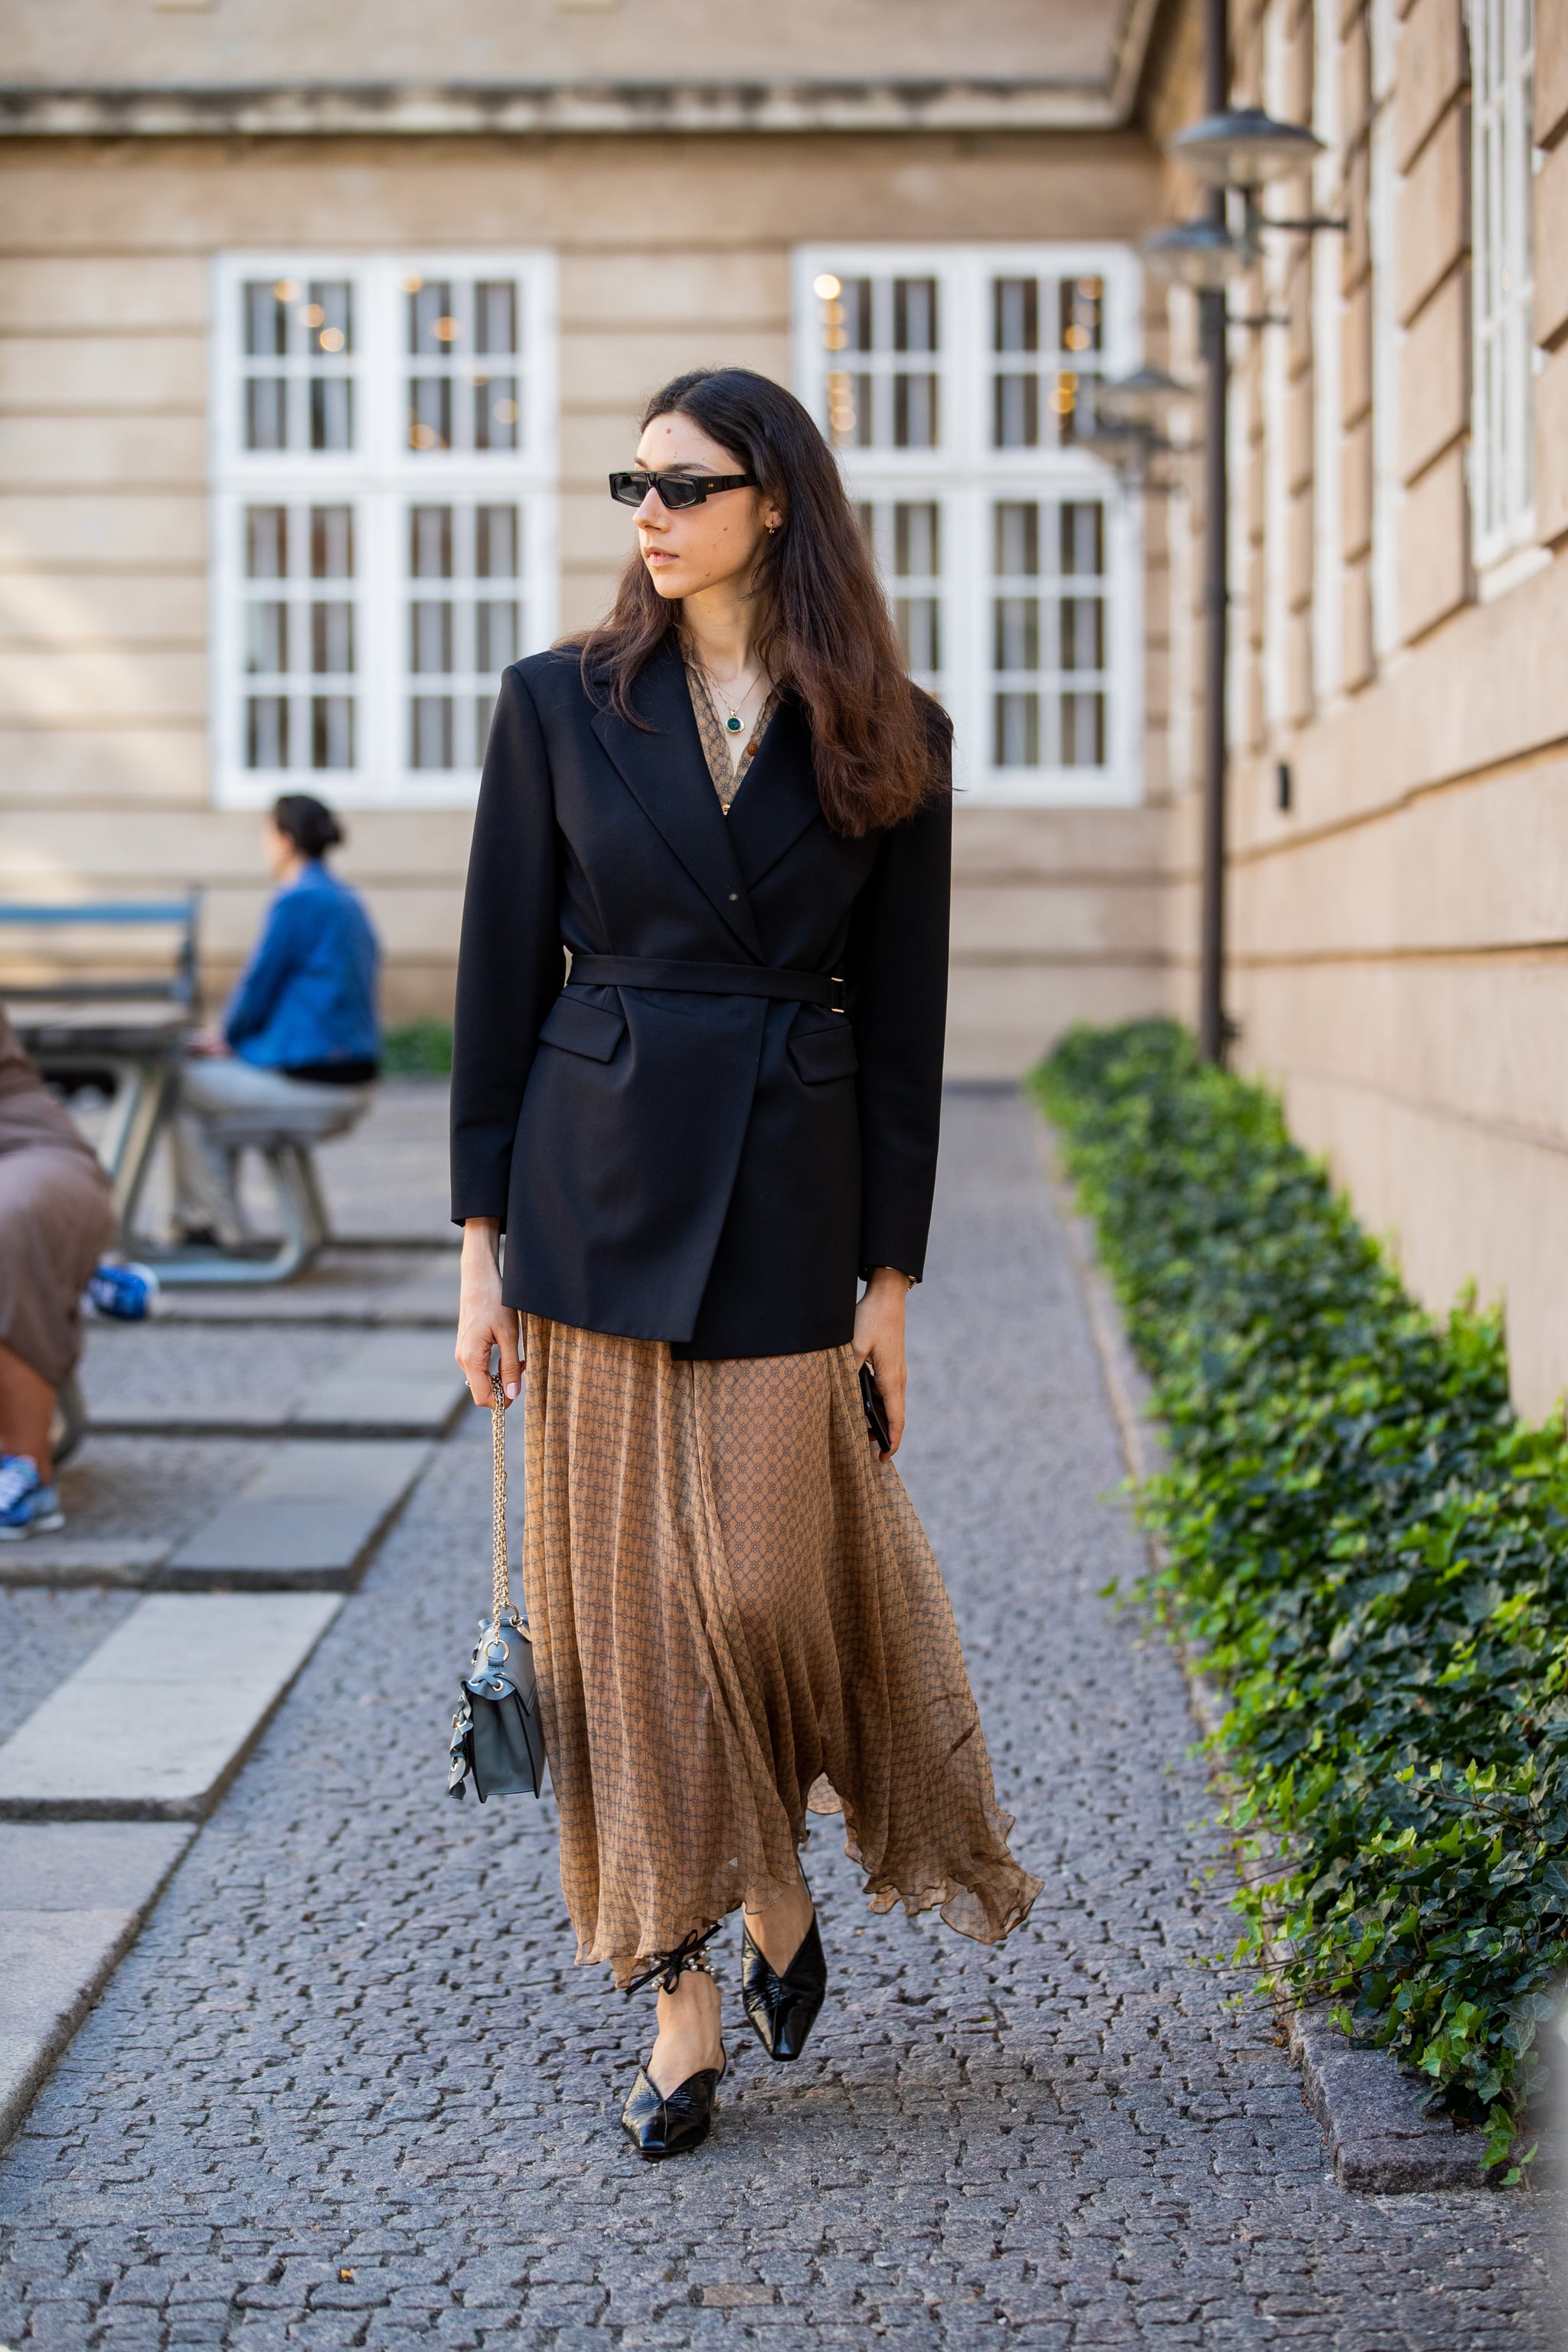 21 Best Long Skirt Outfits How To Wear A Long Skirt | lupon.gov.ph